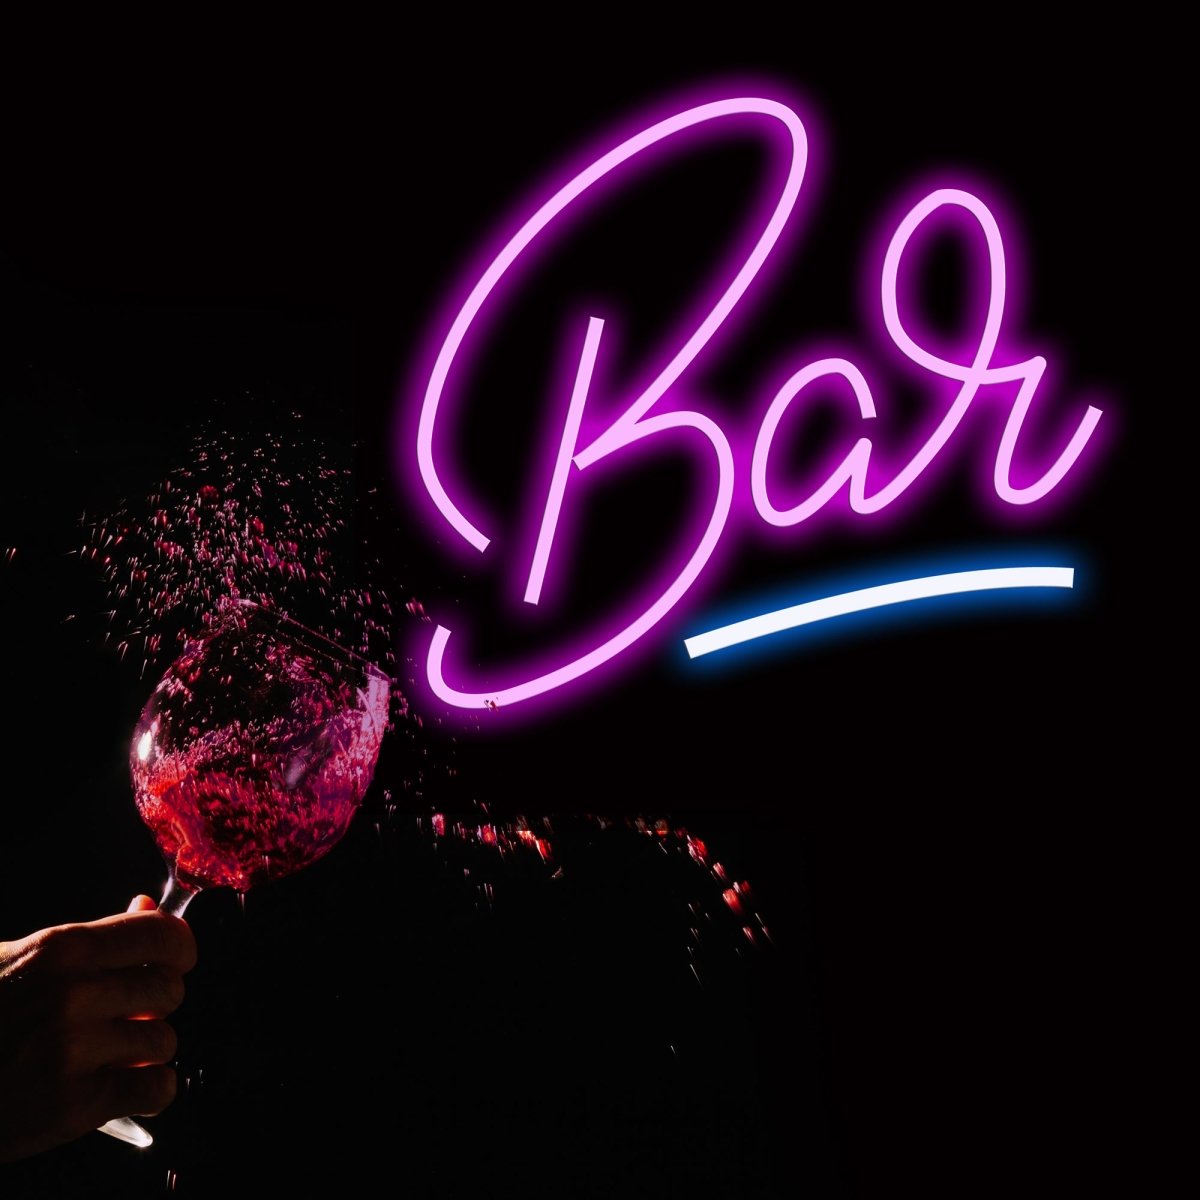 Personalised LED Neon Sign BAR - madaboutneon